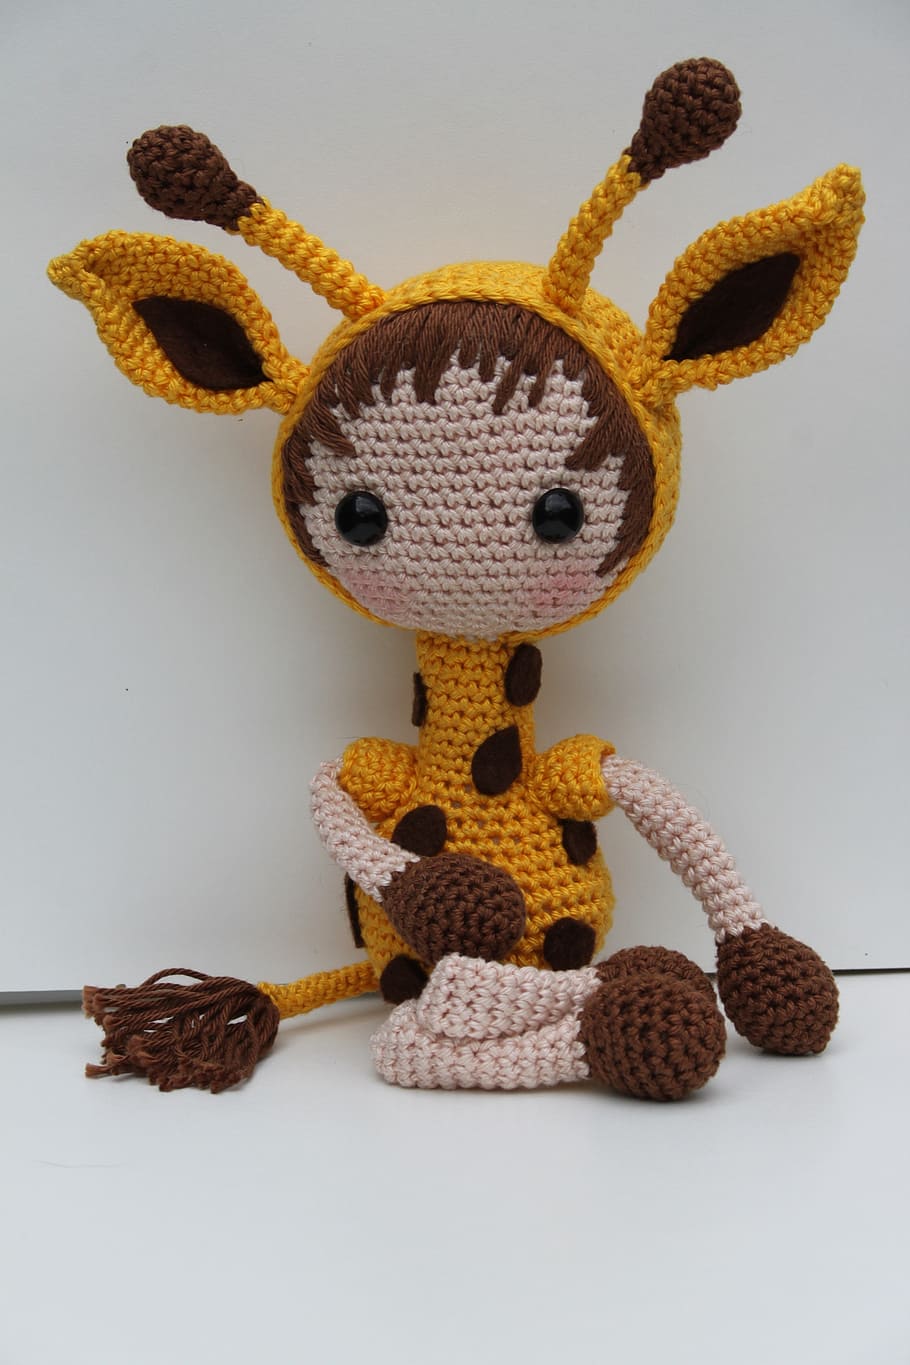 giraffe, crochet giraffe, crochet pattern giraffe, hug, yellow, crochet, cuddly toy, indoors, art and craft, toy